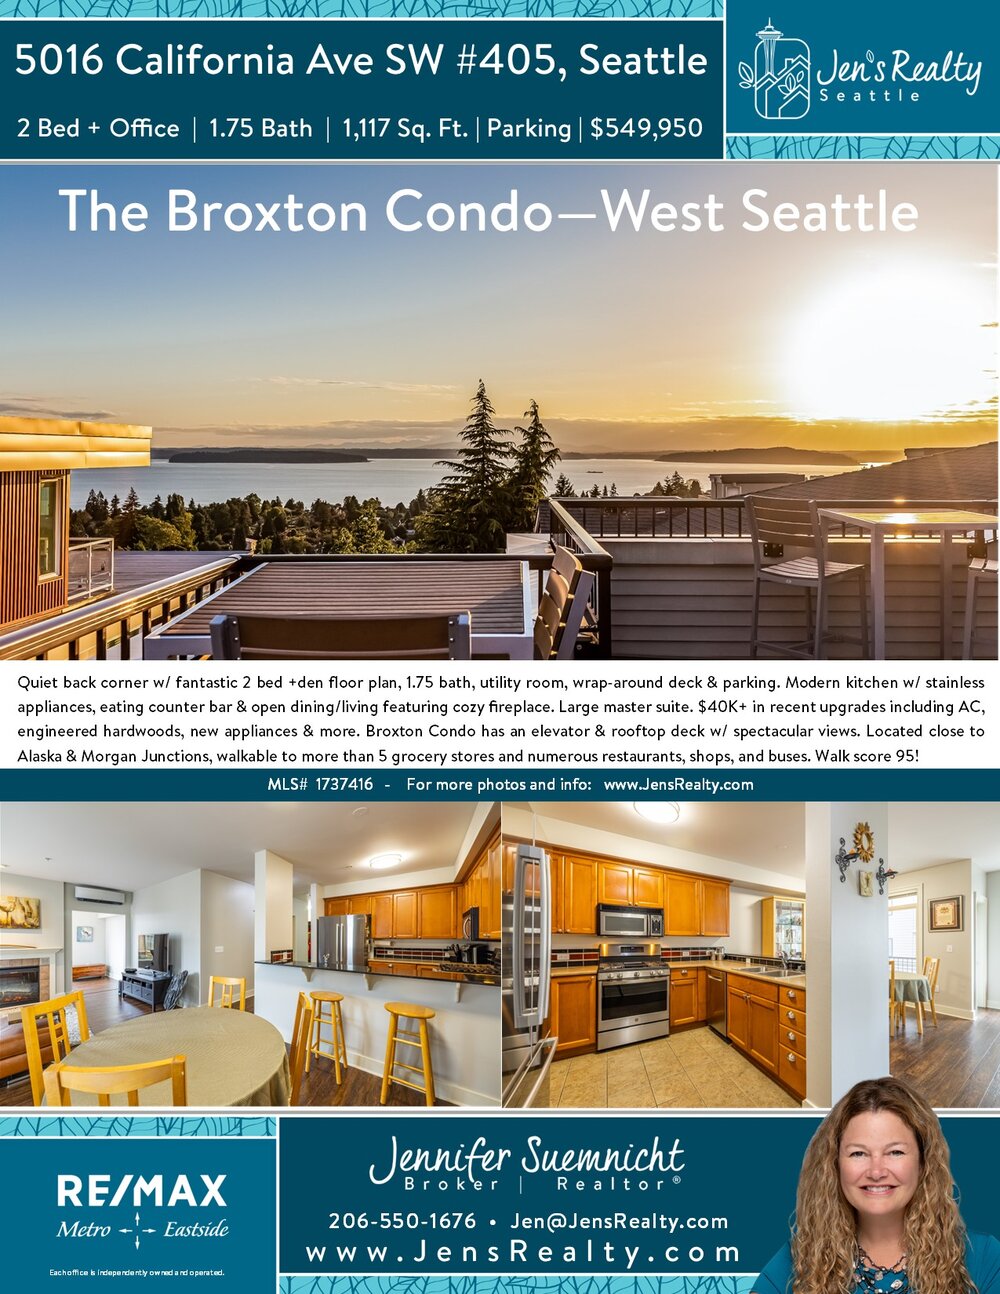 Home Flyer - 5016 California Ave SW #405, Seattle, WA  98136 updated $550K 3.3.21 front.jpg